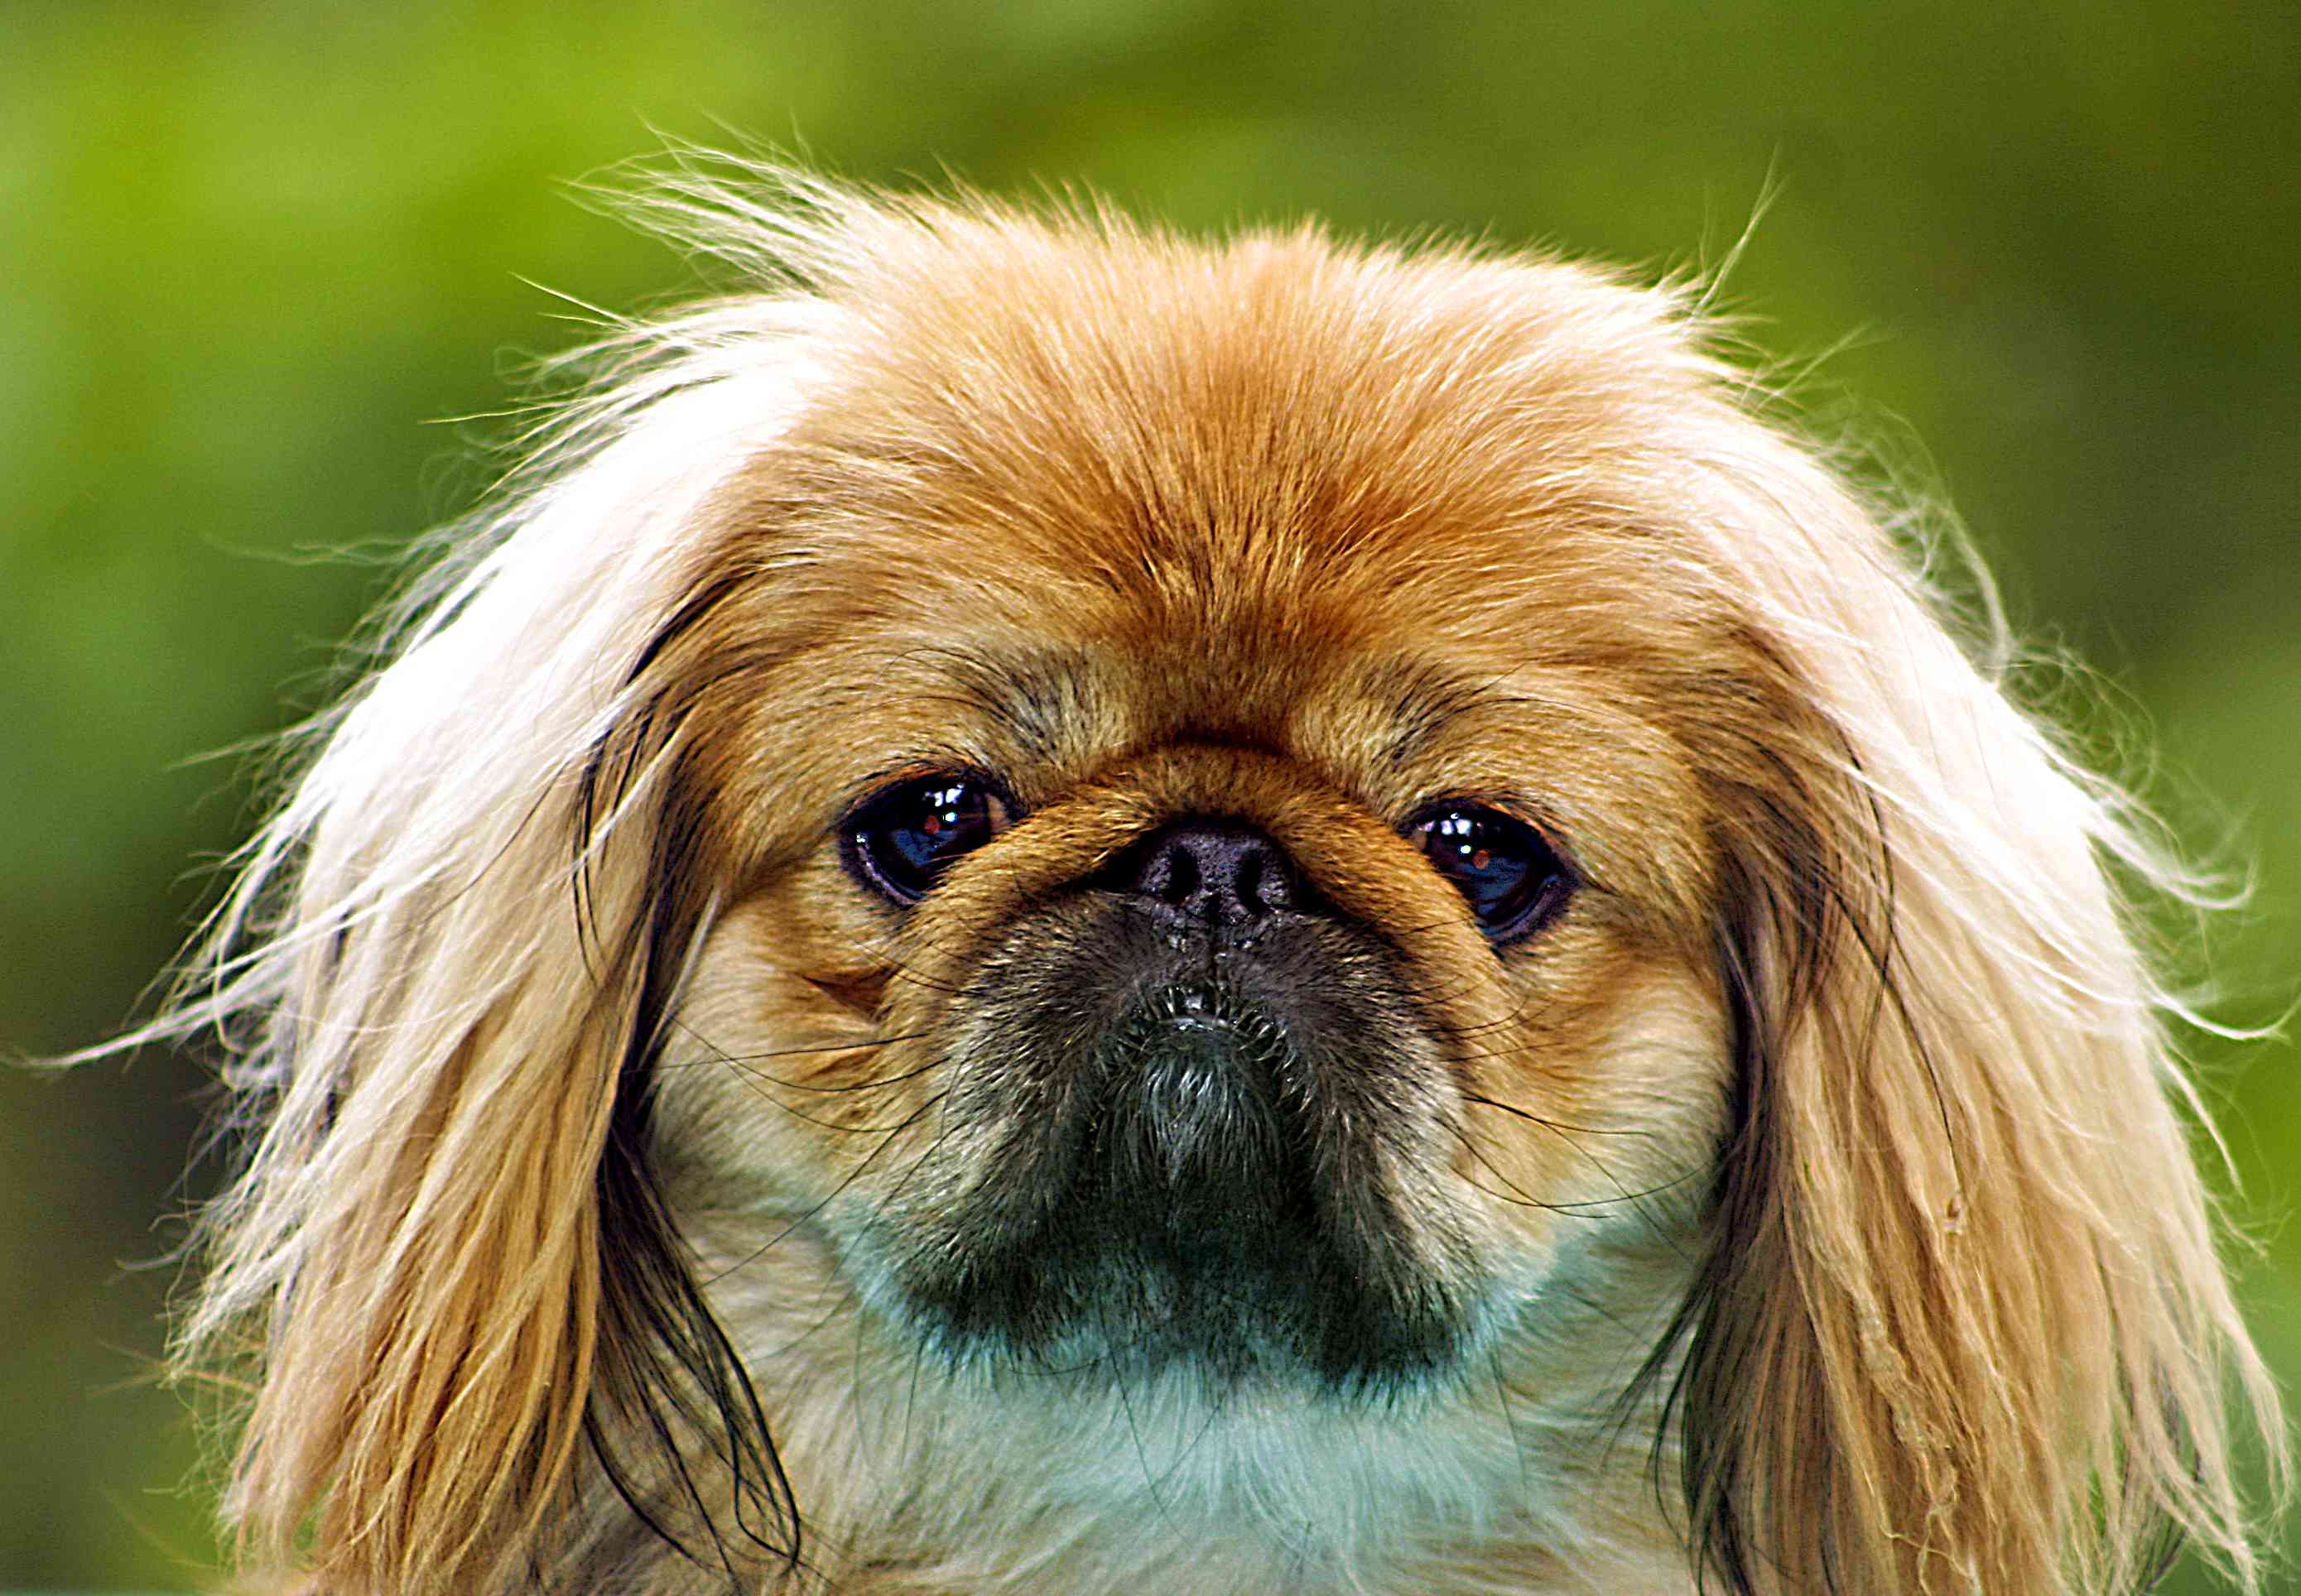 A Pekingese dog looking into the camera.